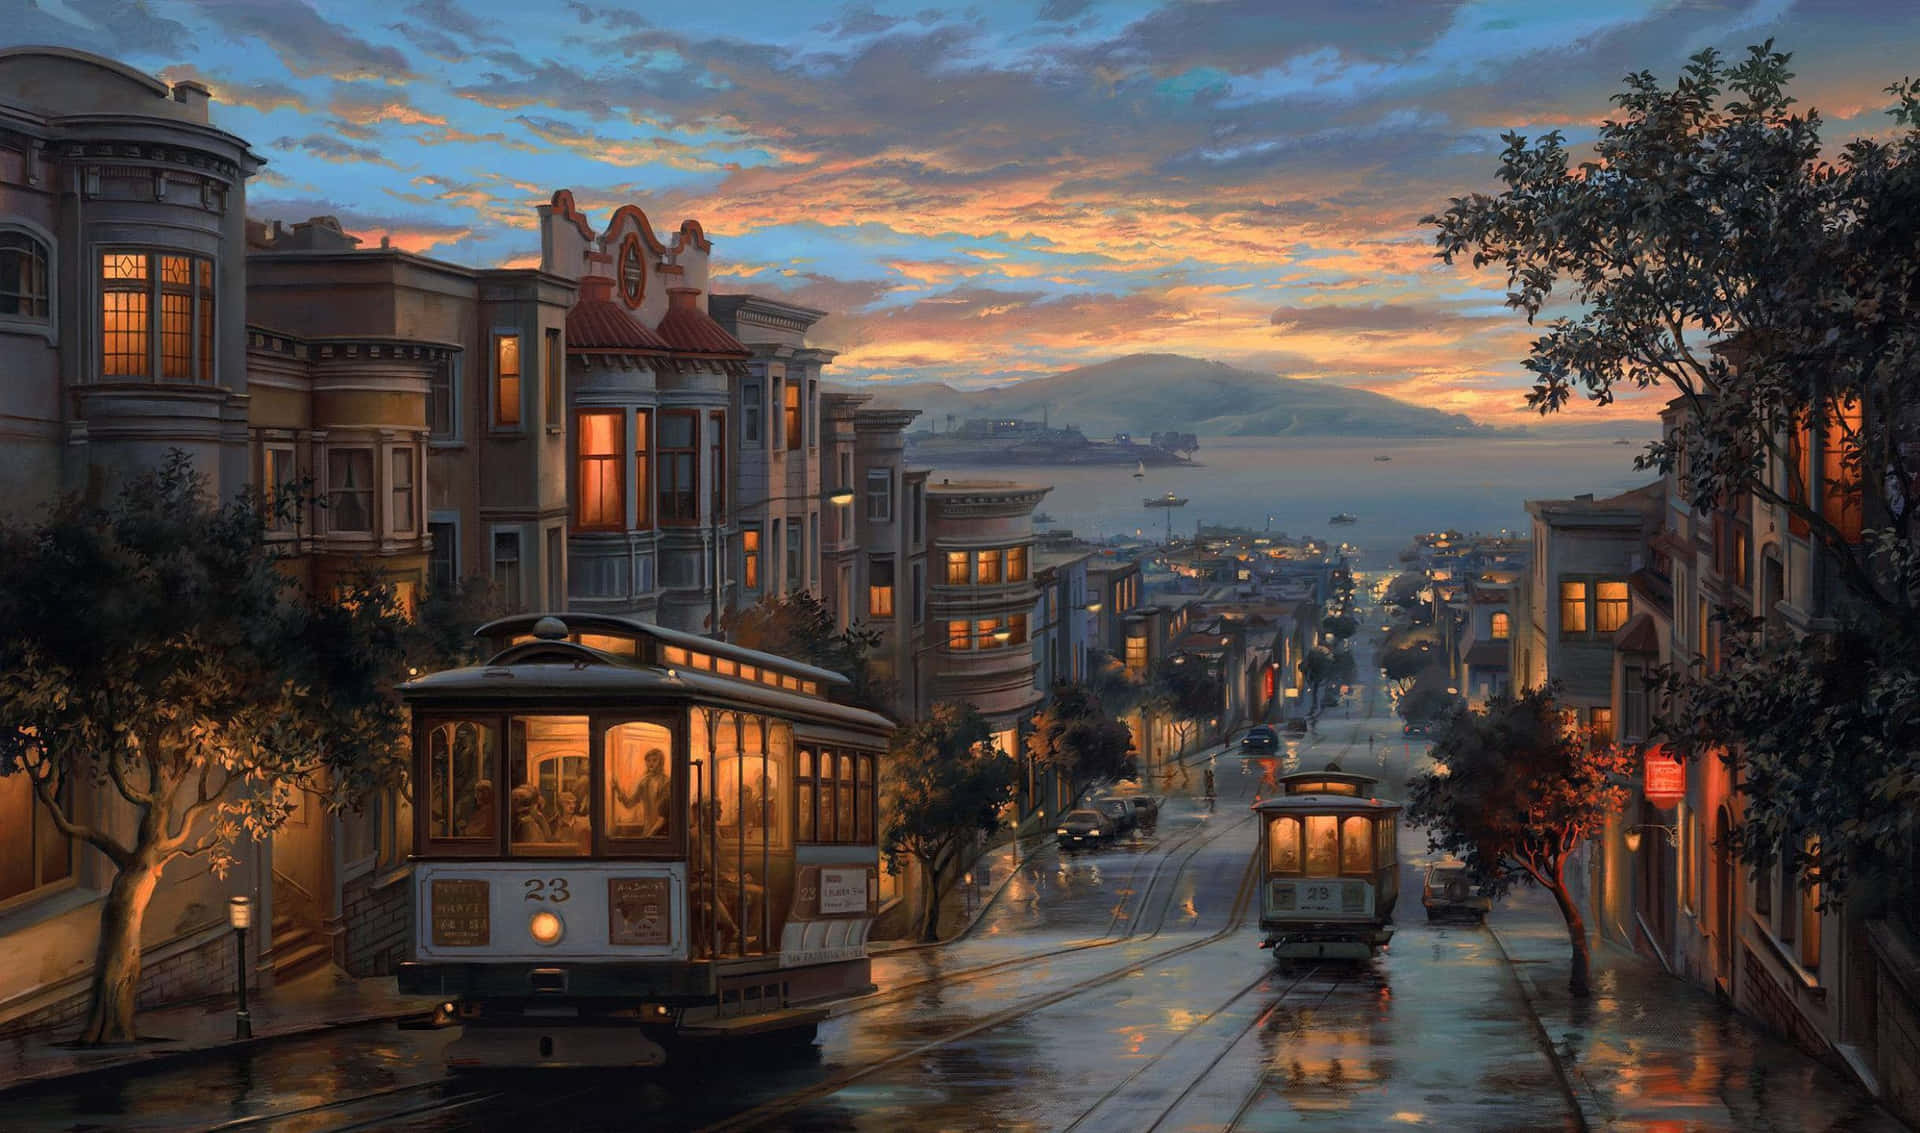 Enjoy the amazing view of San Francisco from the fishermans wharf